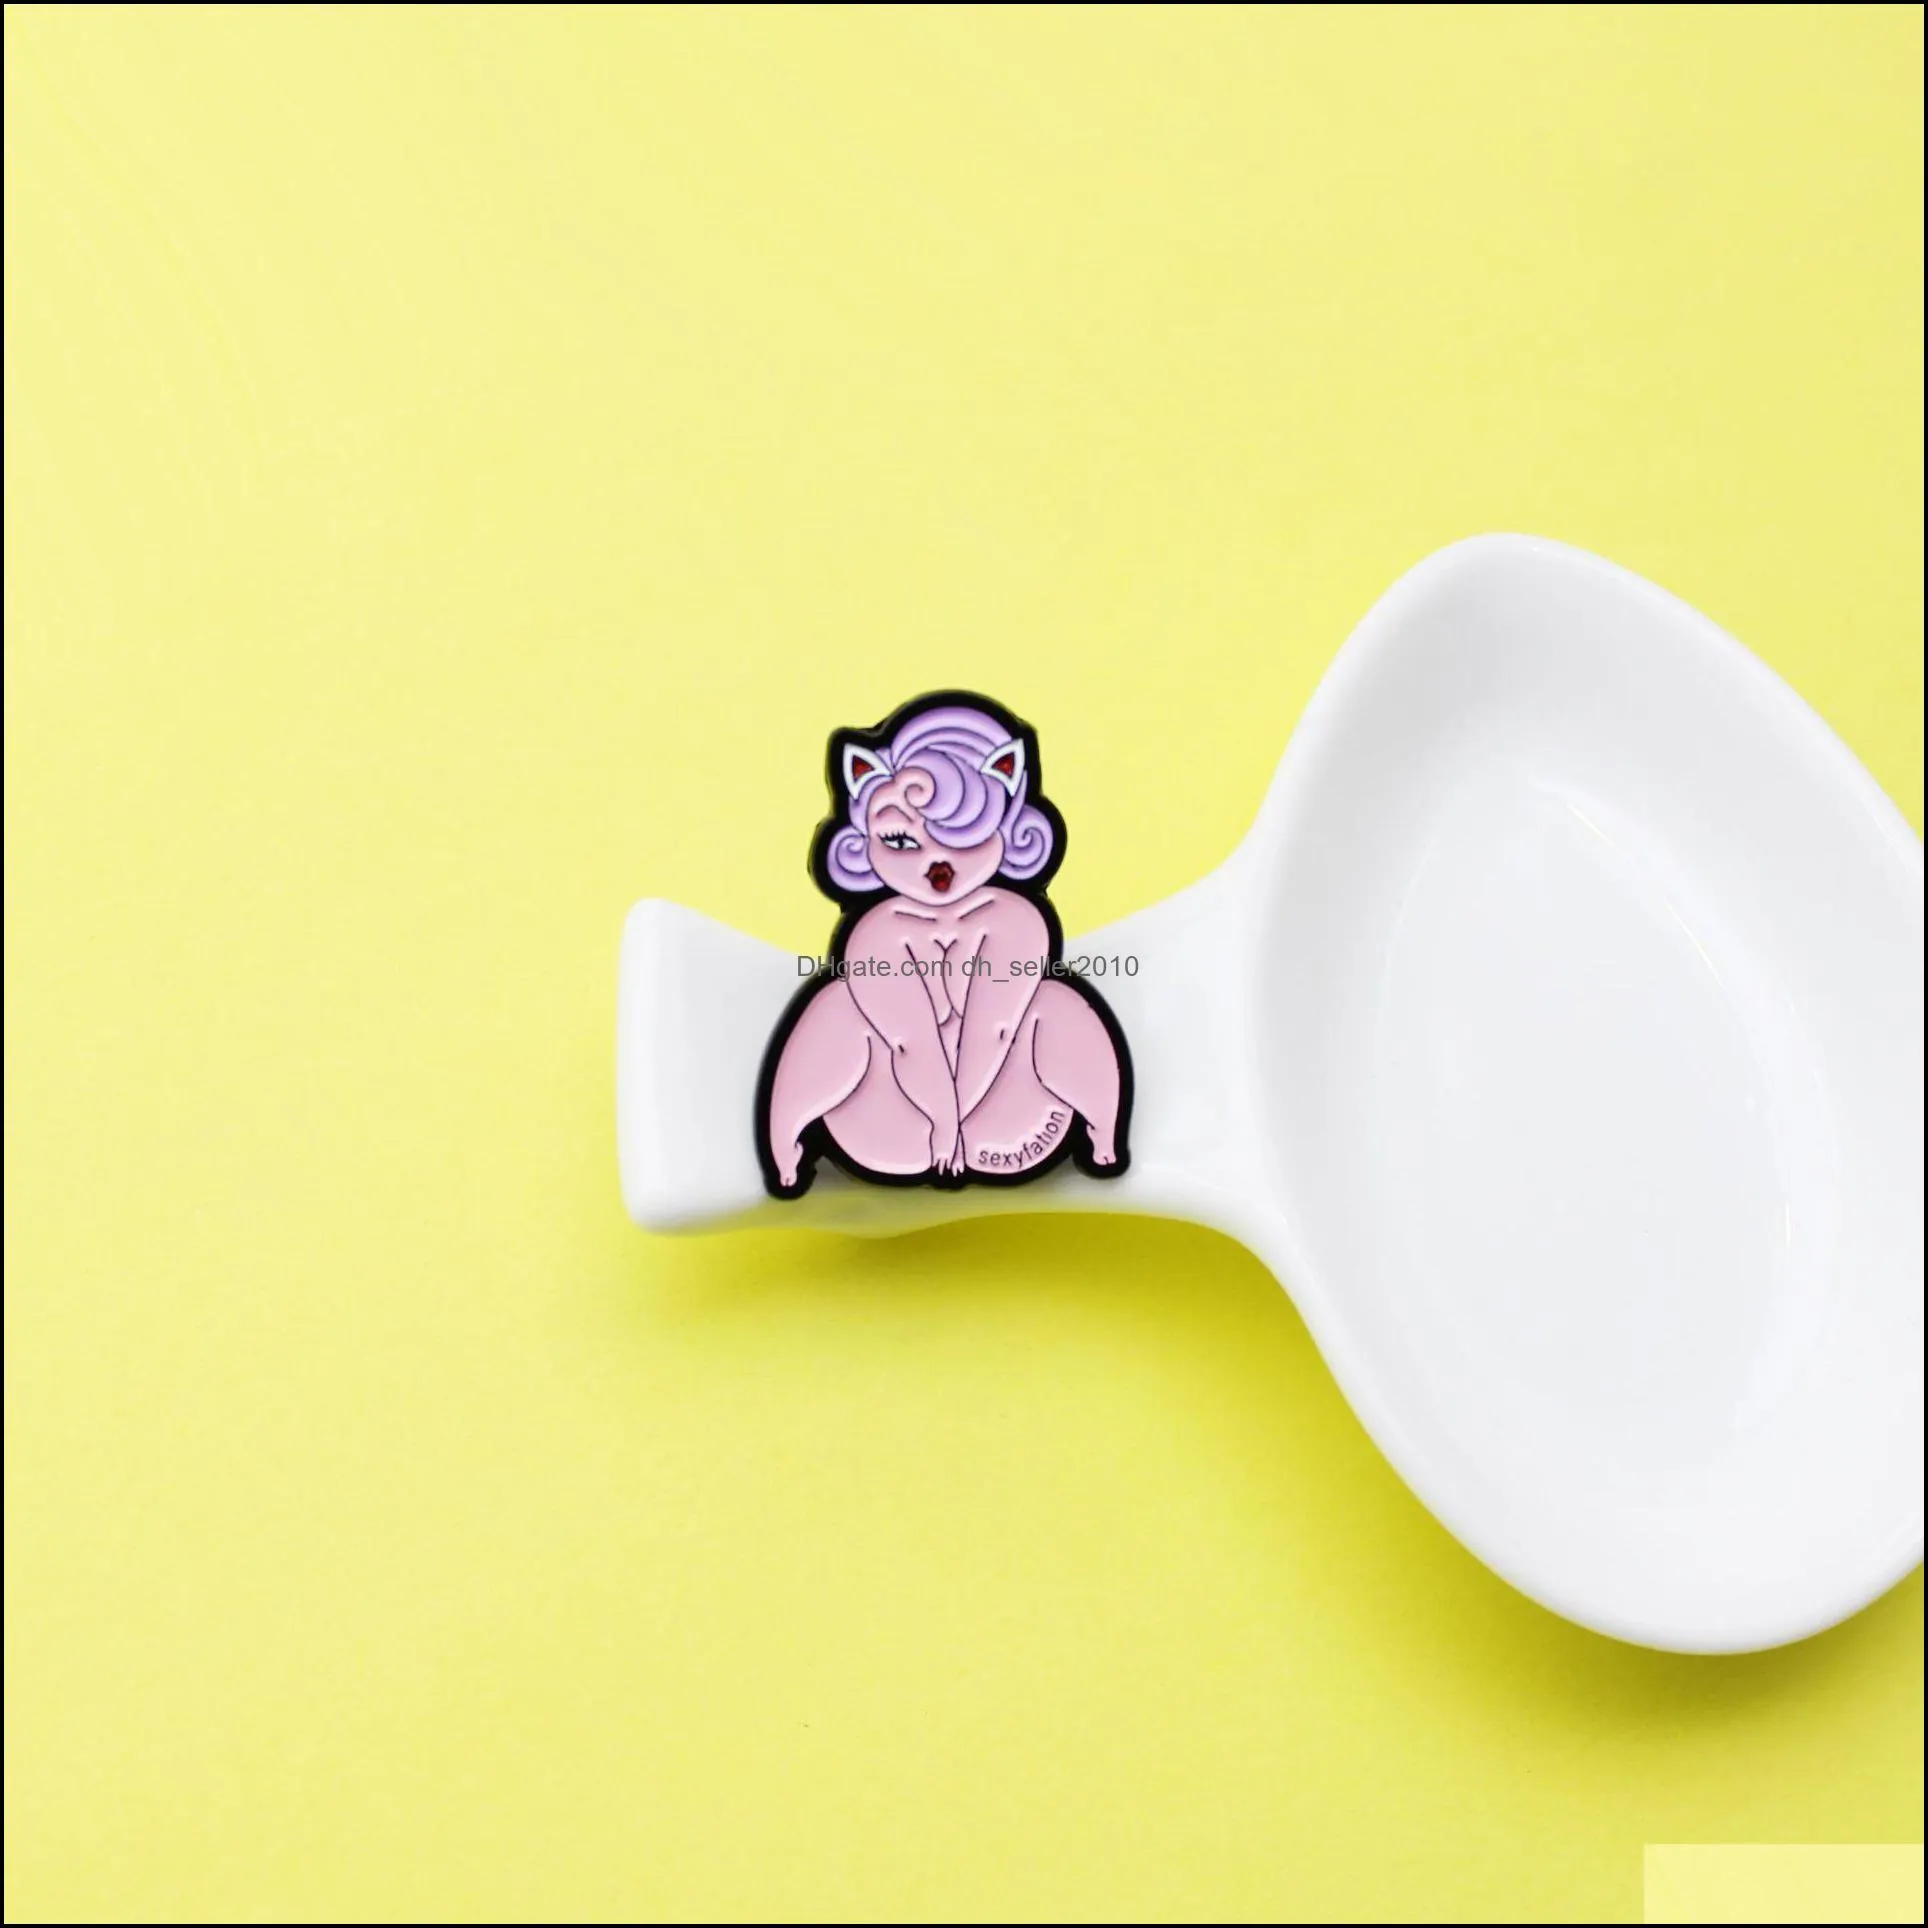 Sexy Lady Enamel Pin Brooch Exposed Women Badges Clothes Lapel Pin Cap Bag Fun Jewelry 601 H1